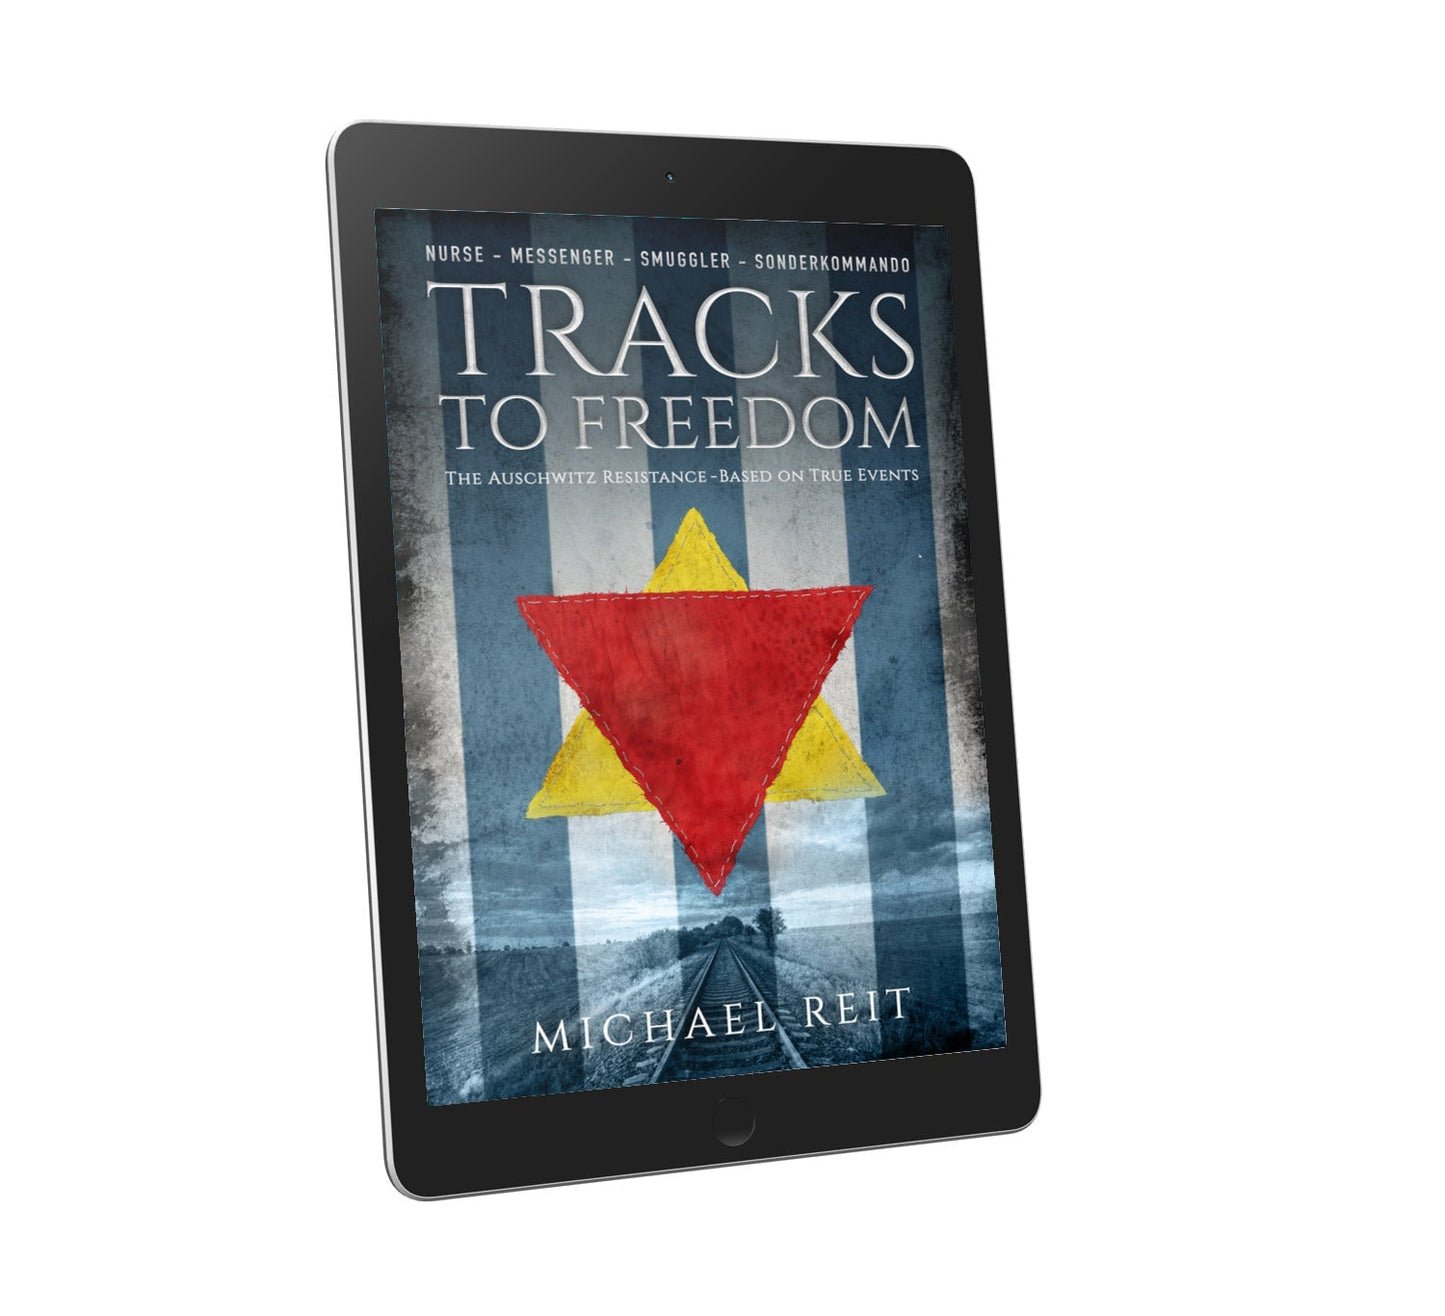 Tracks to Freedom, Ebook - Special UK Deal